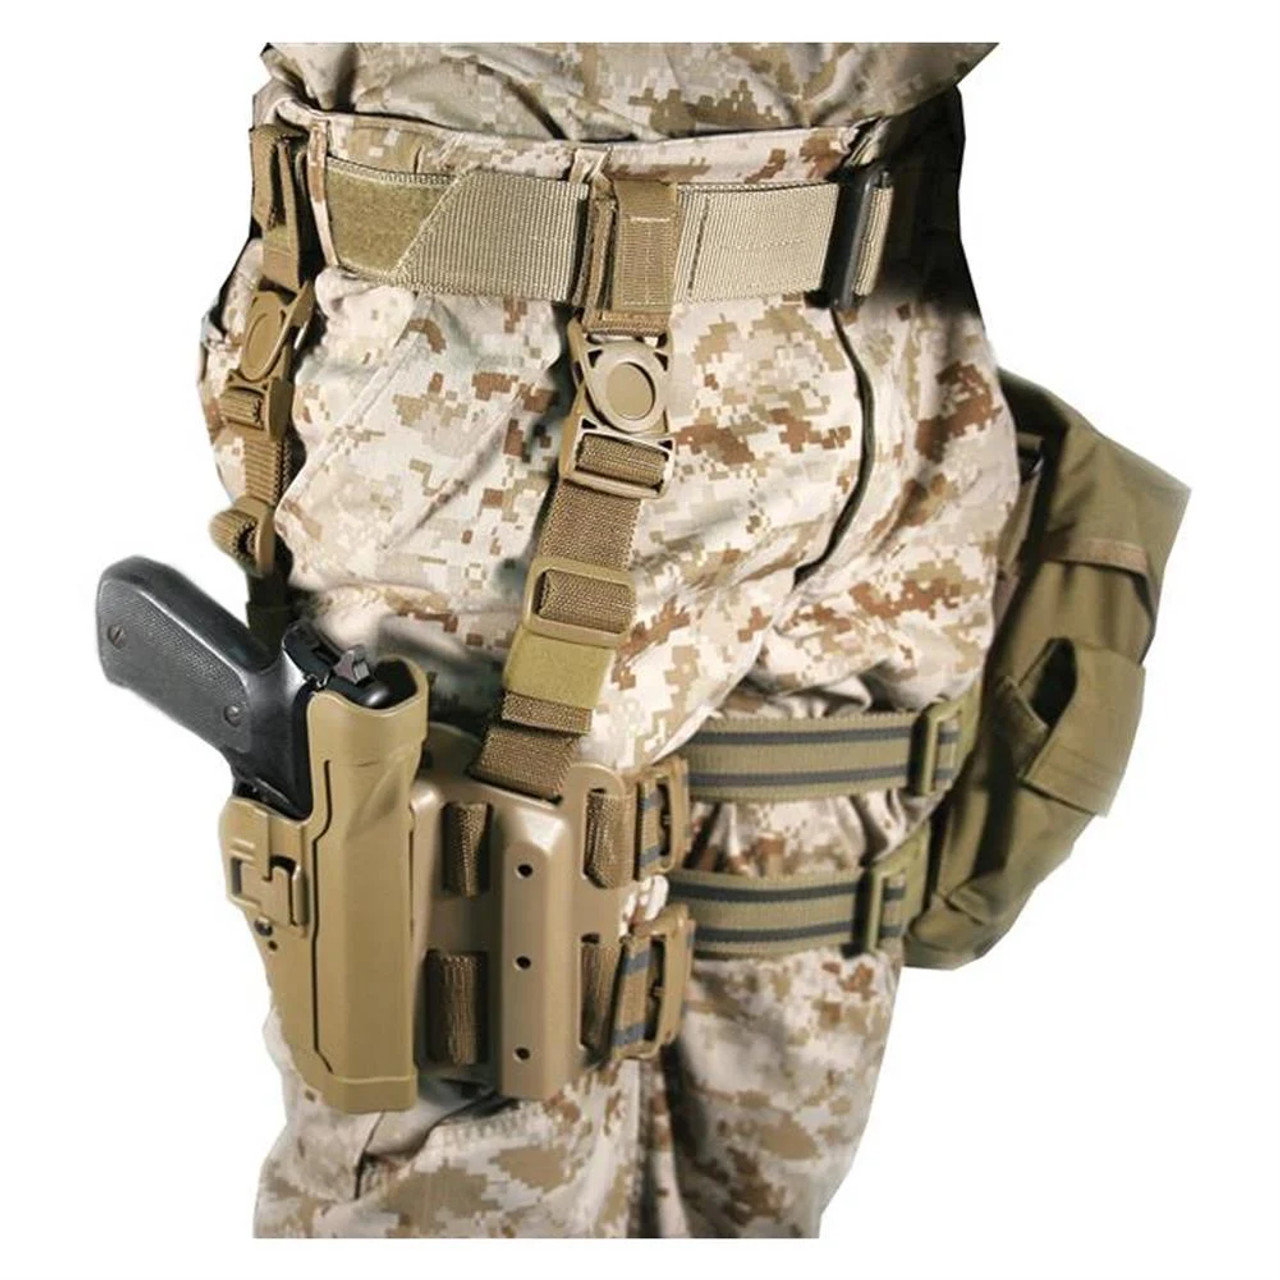 BASIC TACTICAL LEG HOLSTER – Army Stores